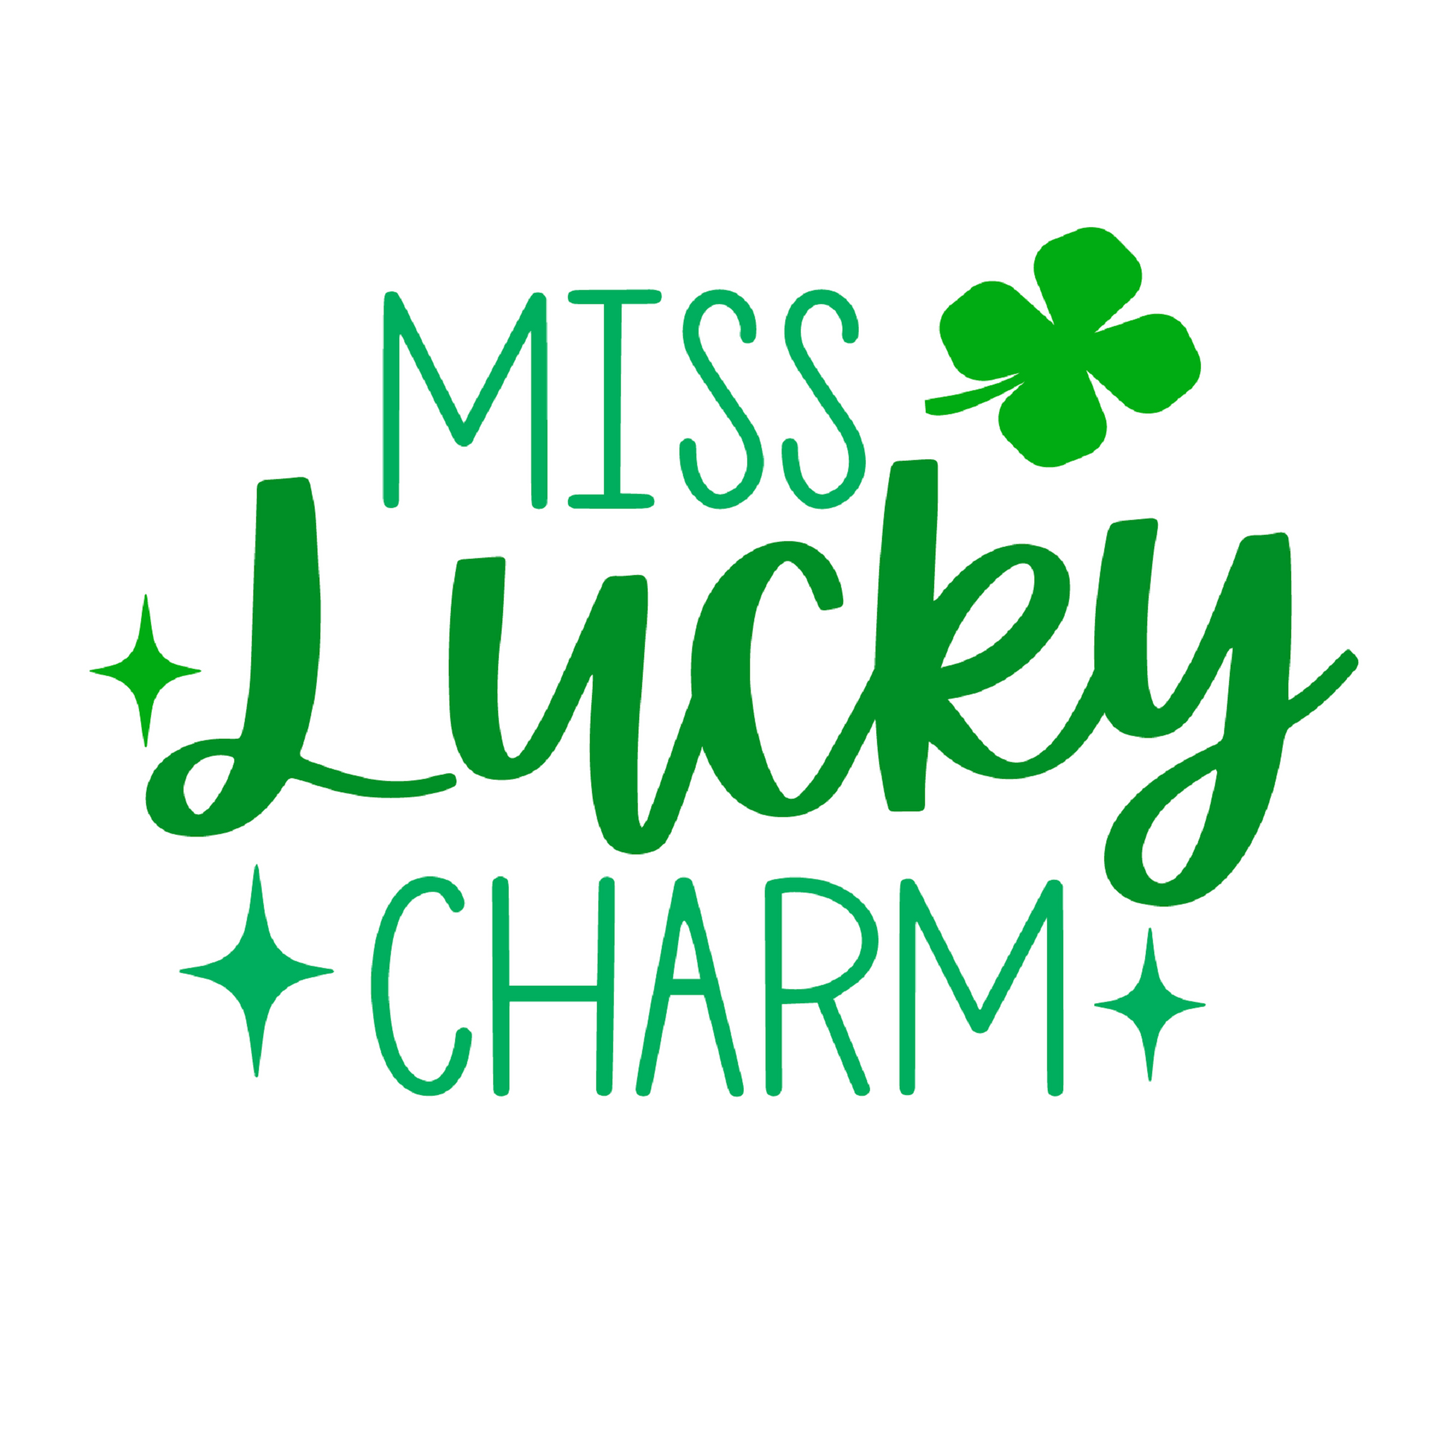 Inspirational Quote Miss Lucky Charm. Motivational Sticker Vinyl Decal Motivation Stickers- 5" Vinyl Sticker Waterproof